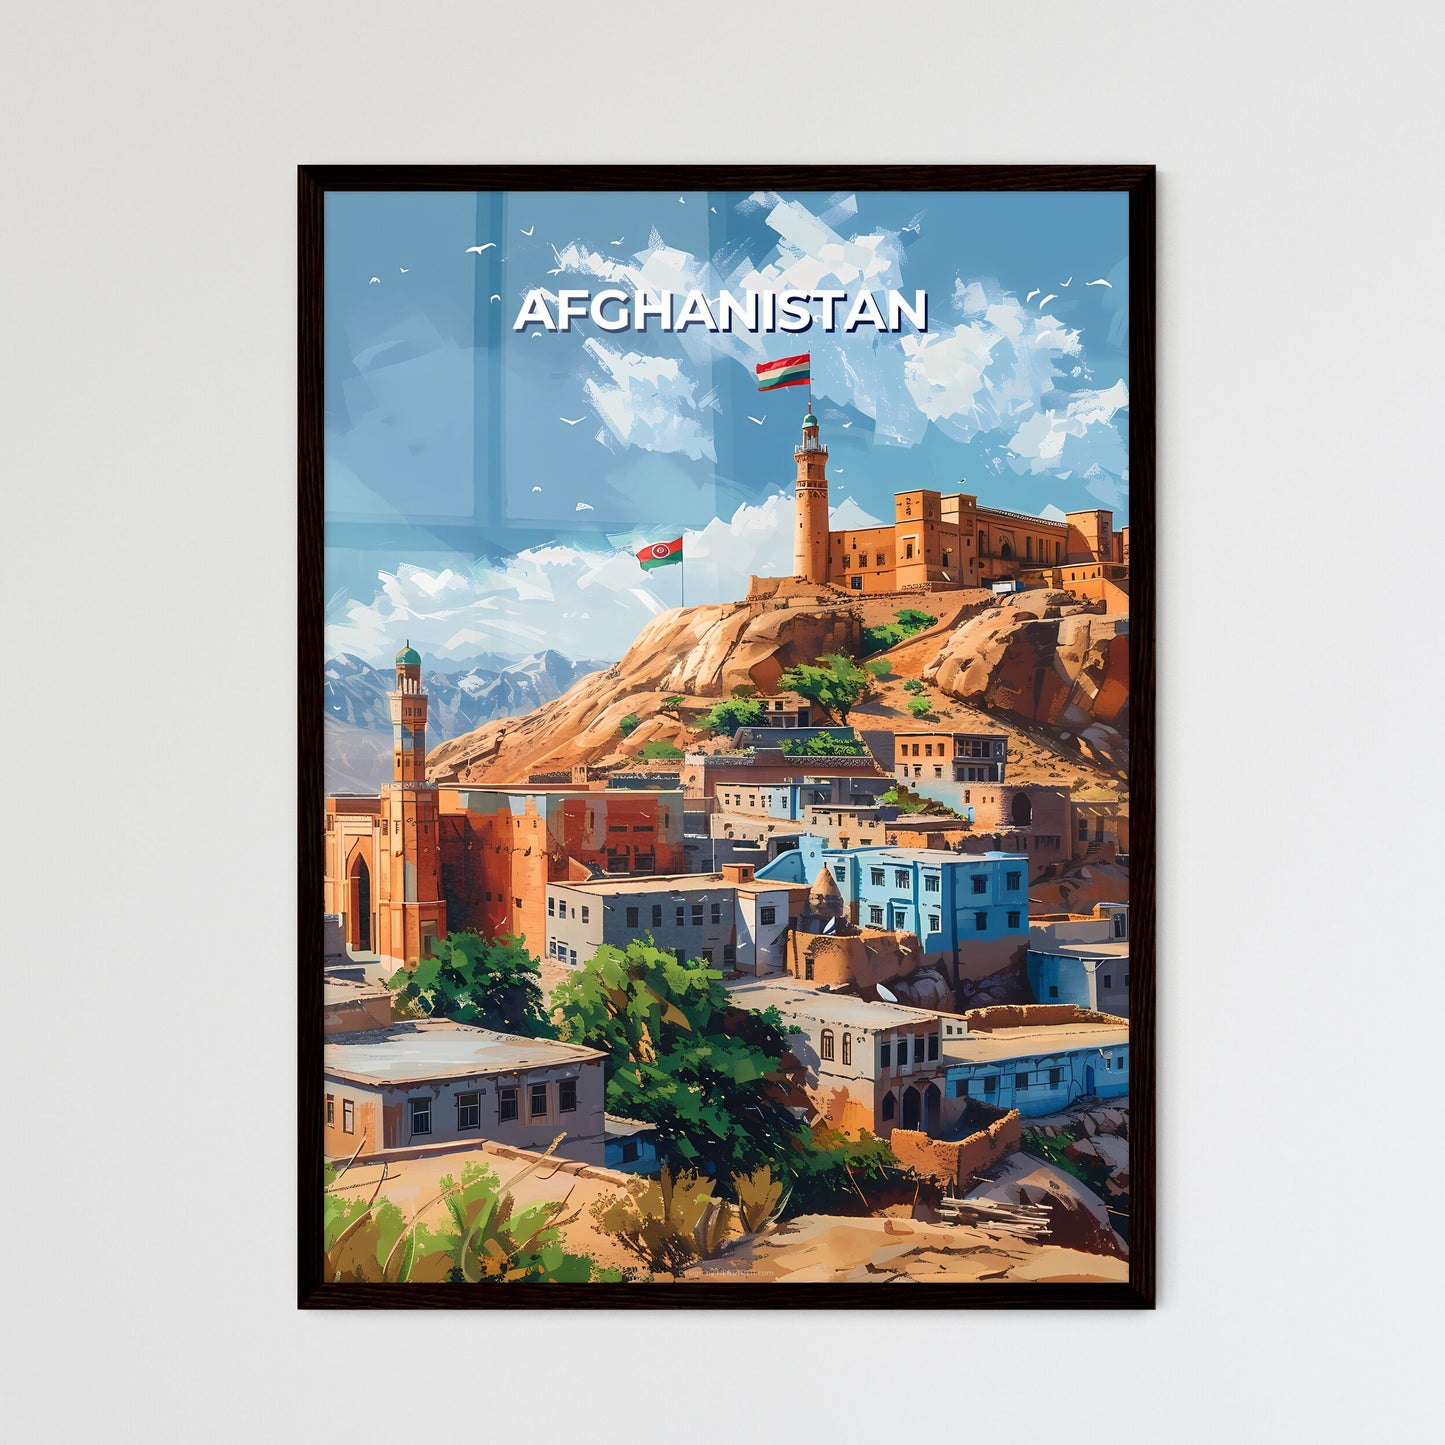 Afghanistan, South Asia - Colorful painting of a city on a mountain with a flag, showcasing the rich art and culture of the region.